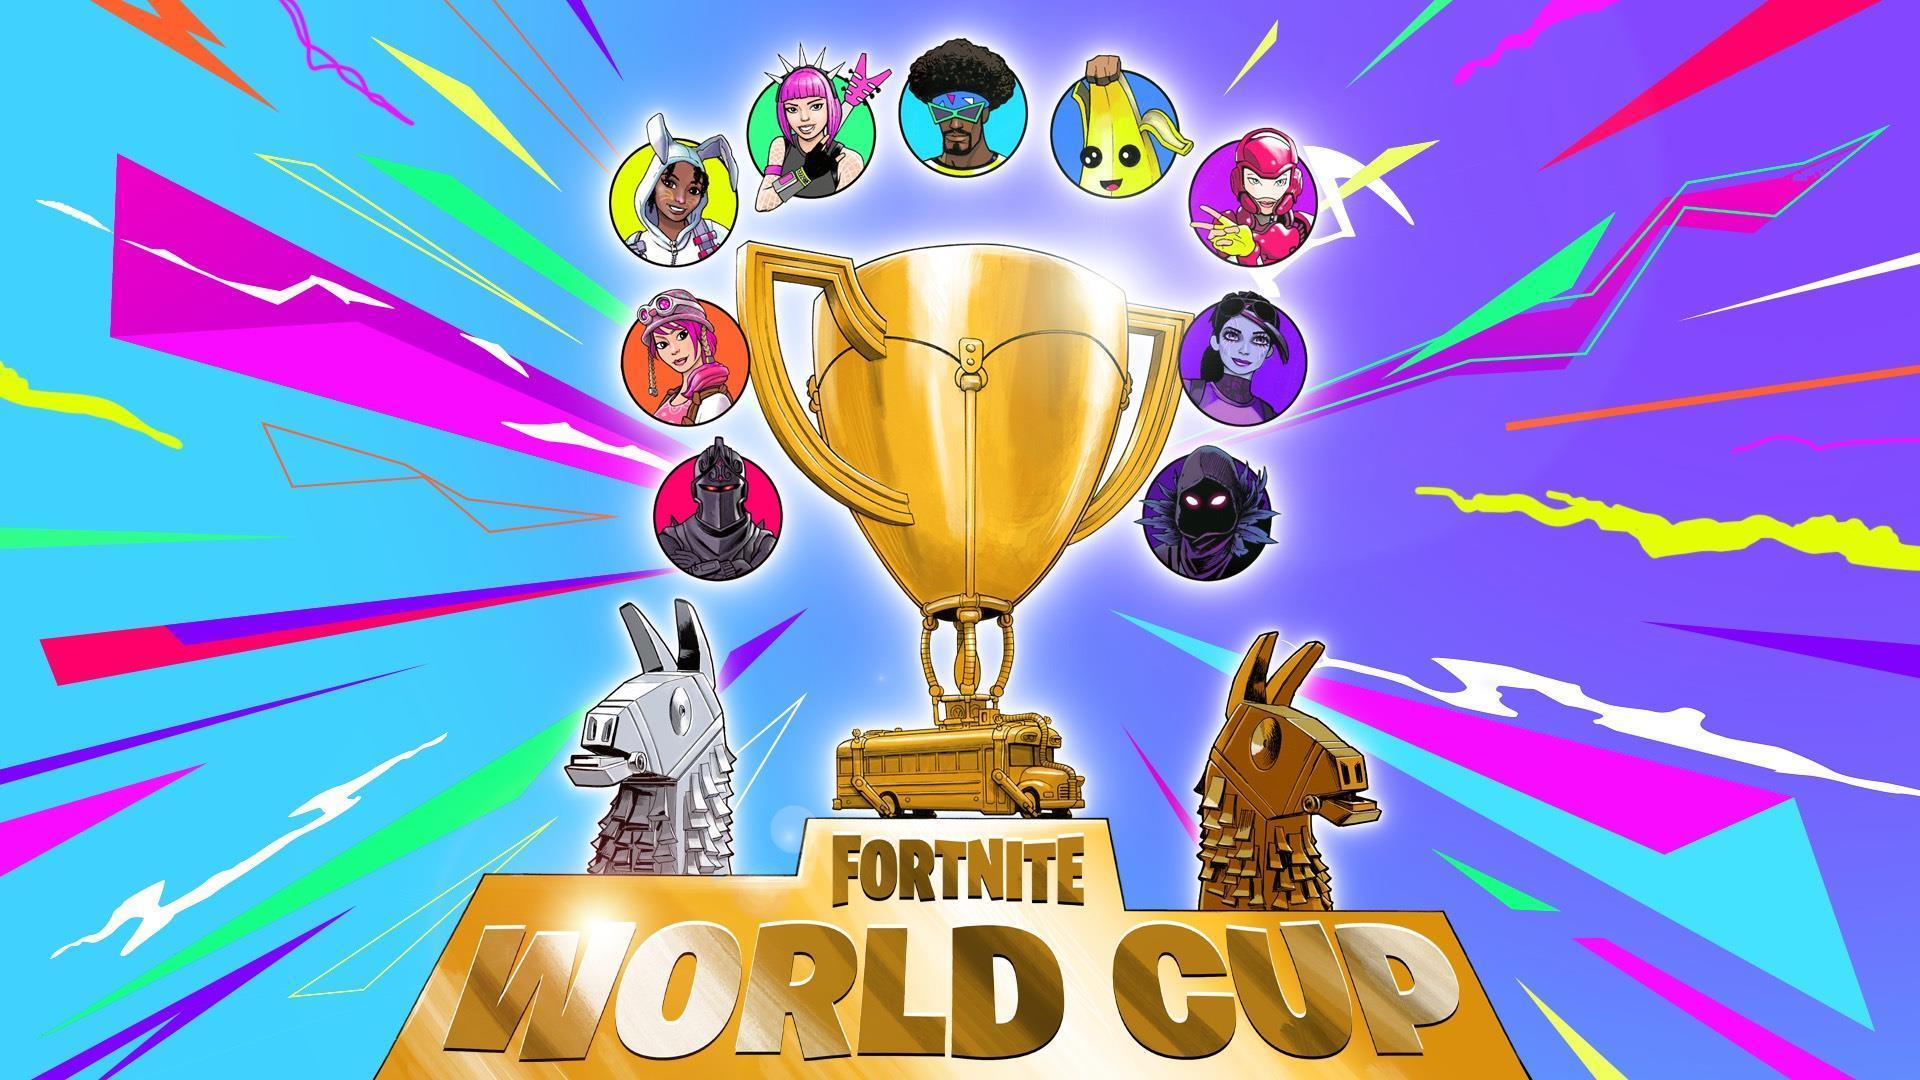 Fortnite World Cup Wallpapers - Wallpaper Cave